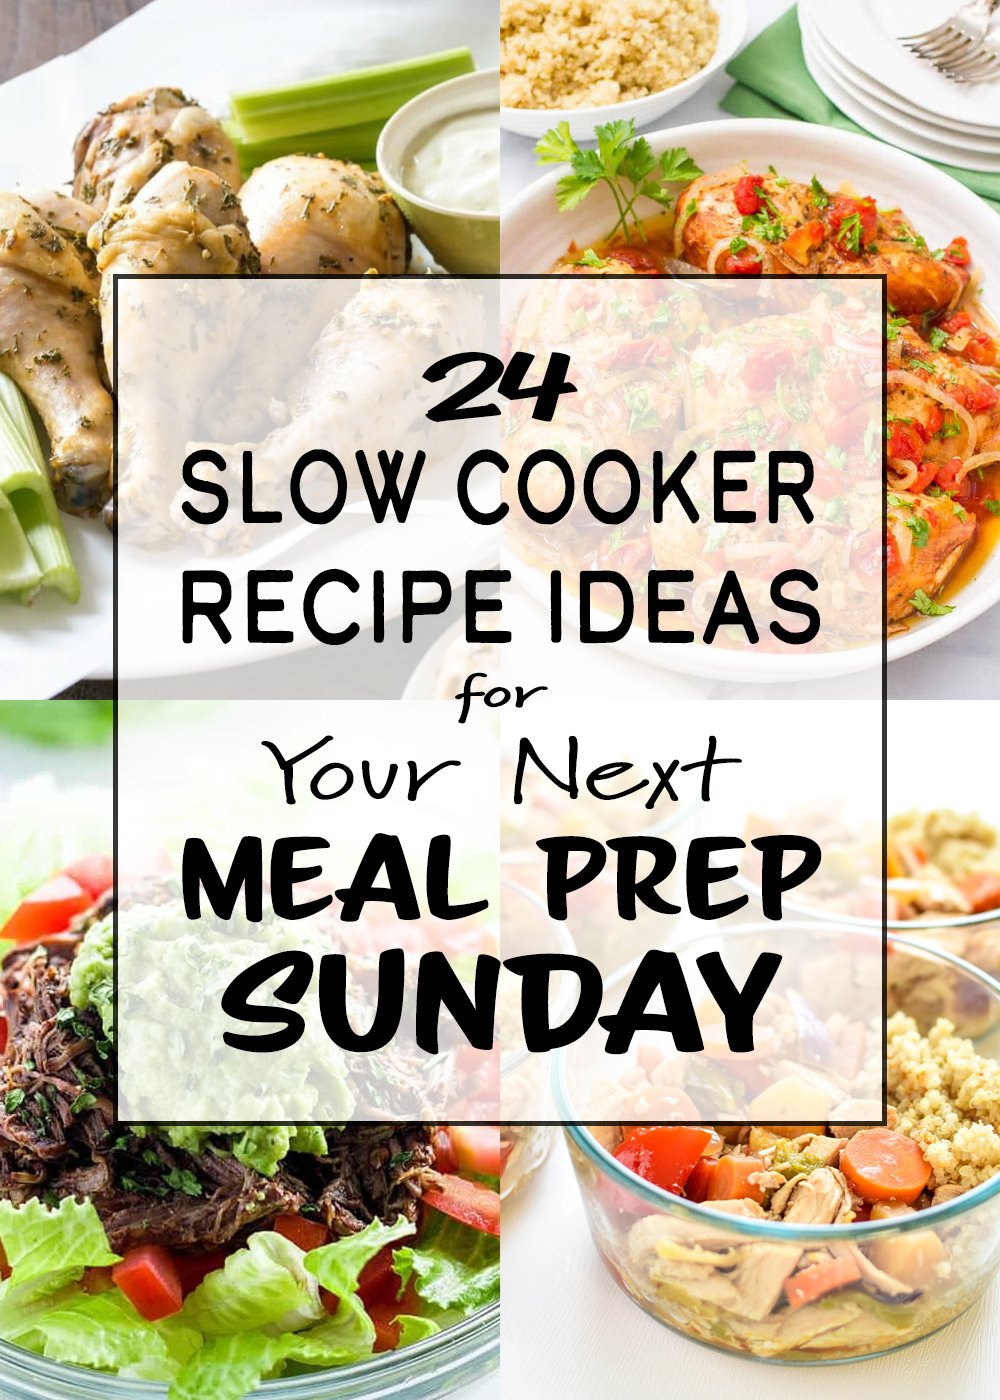 24 Slow Cooker Recipe Ideas for Your Next Meal Prep Sunday - So many slow cooker ideas to put into your next meal plan! - ProjectMealPlan.com